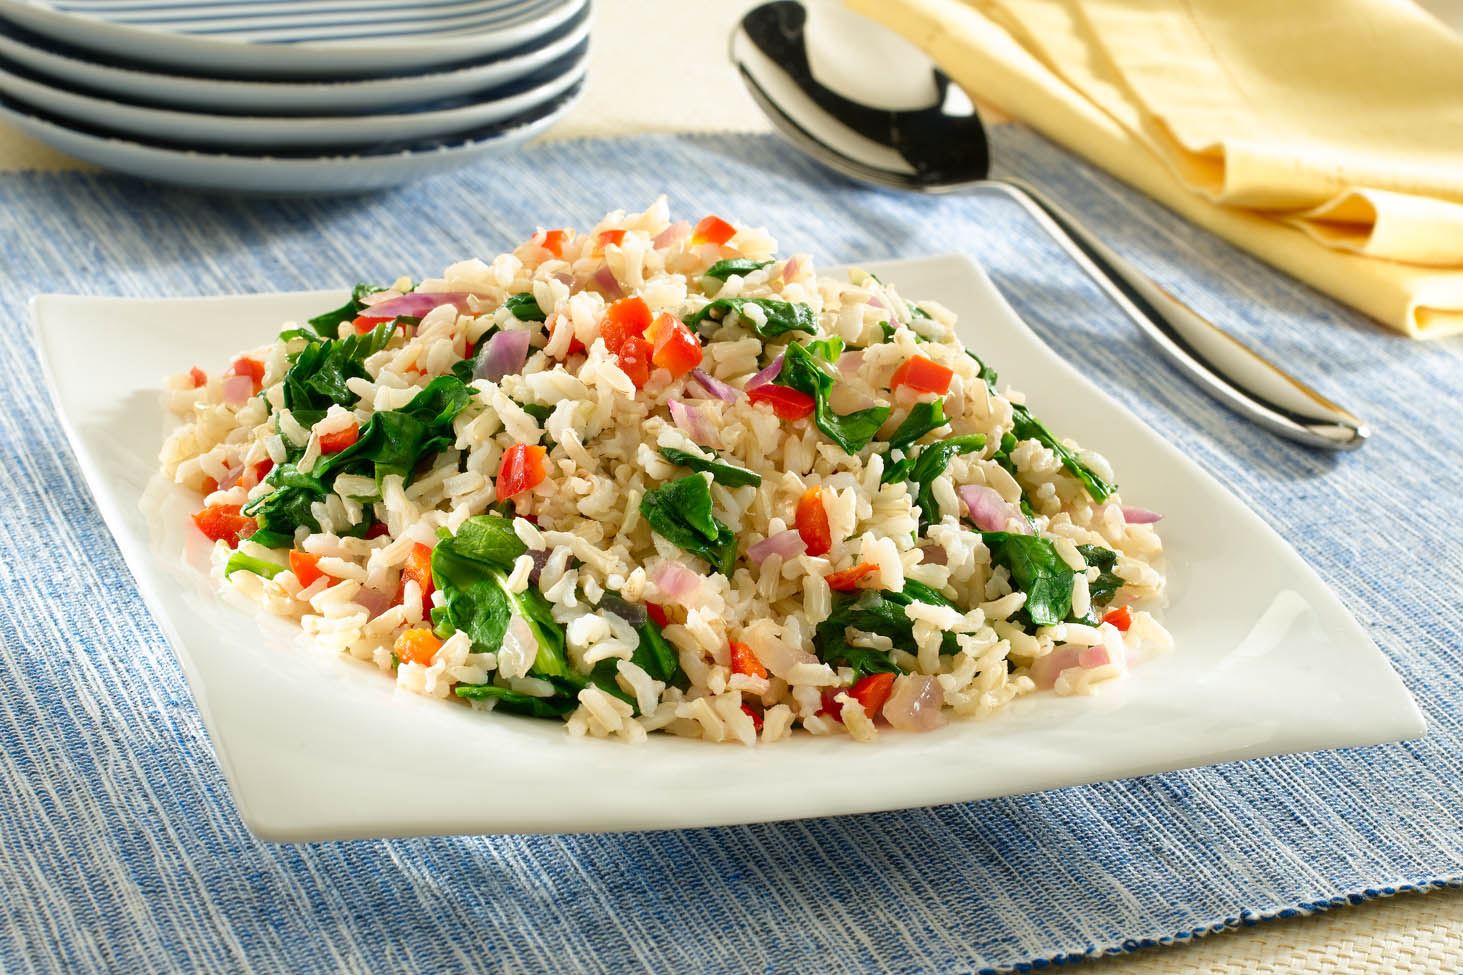 Brown Rice with Vegetables